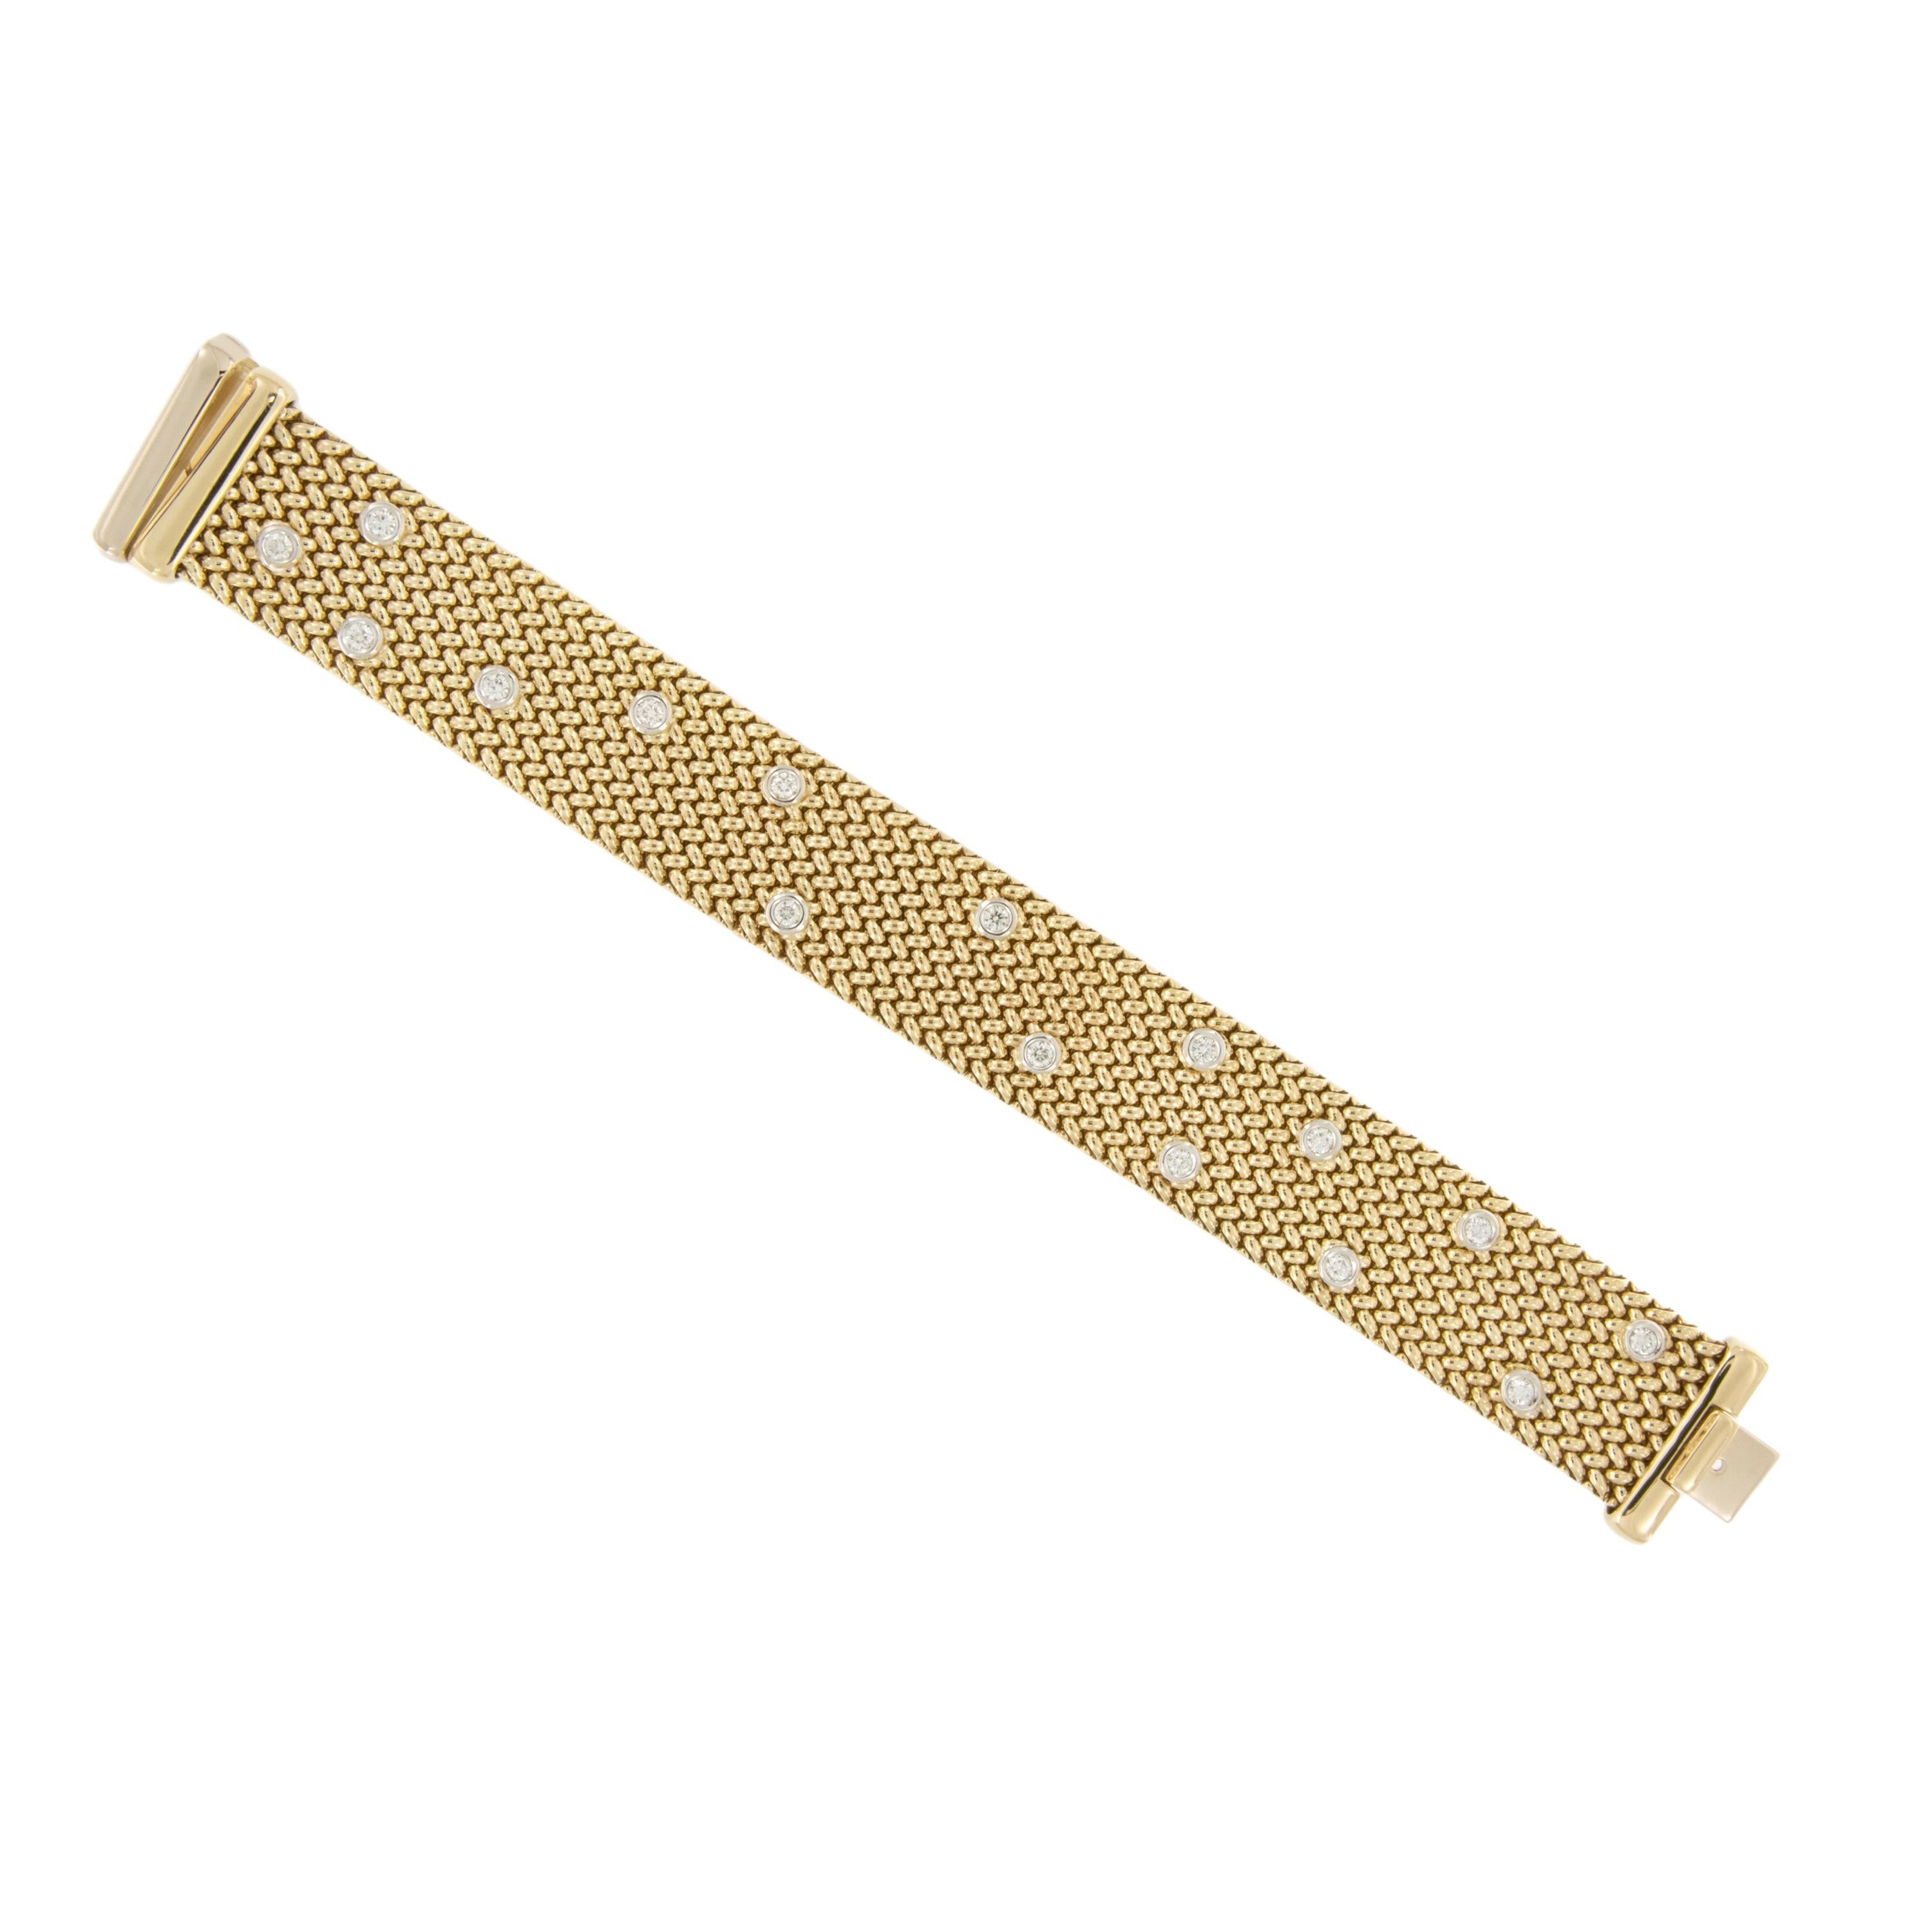 The expert craftsmanship is evident here in this beautiful Italian mesh bracelet made of rich 18 karat yellow gold. This bracelet is as comfortable on as it is stunning! The wide woven bracelet is set with 16 VS, F-G RBC diamonds = 1.20 Cttw and is